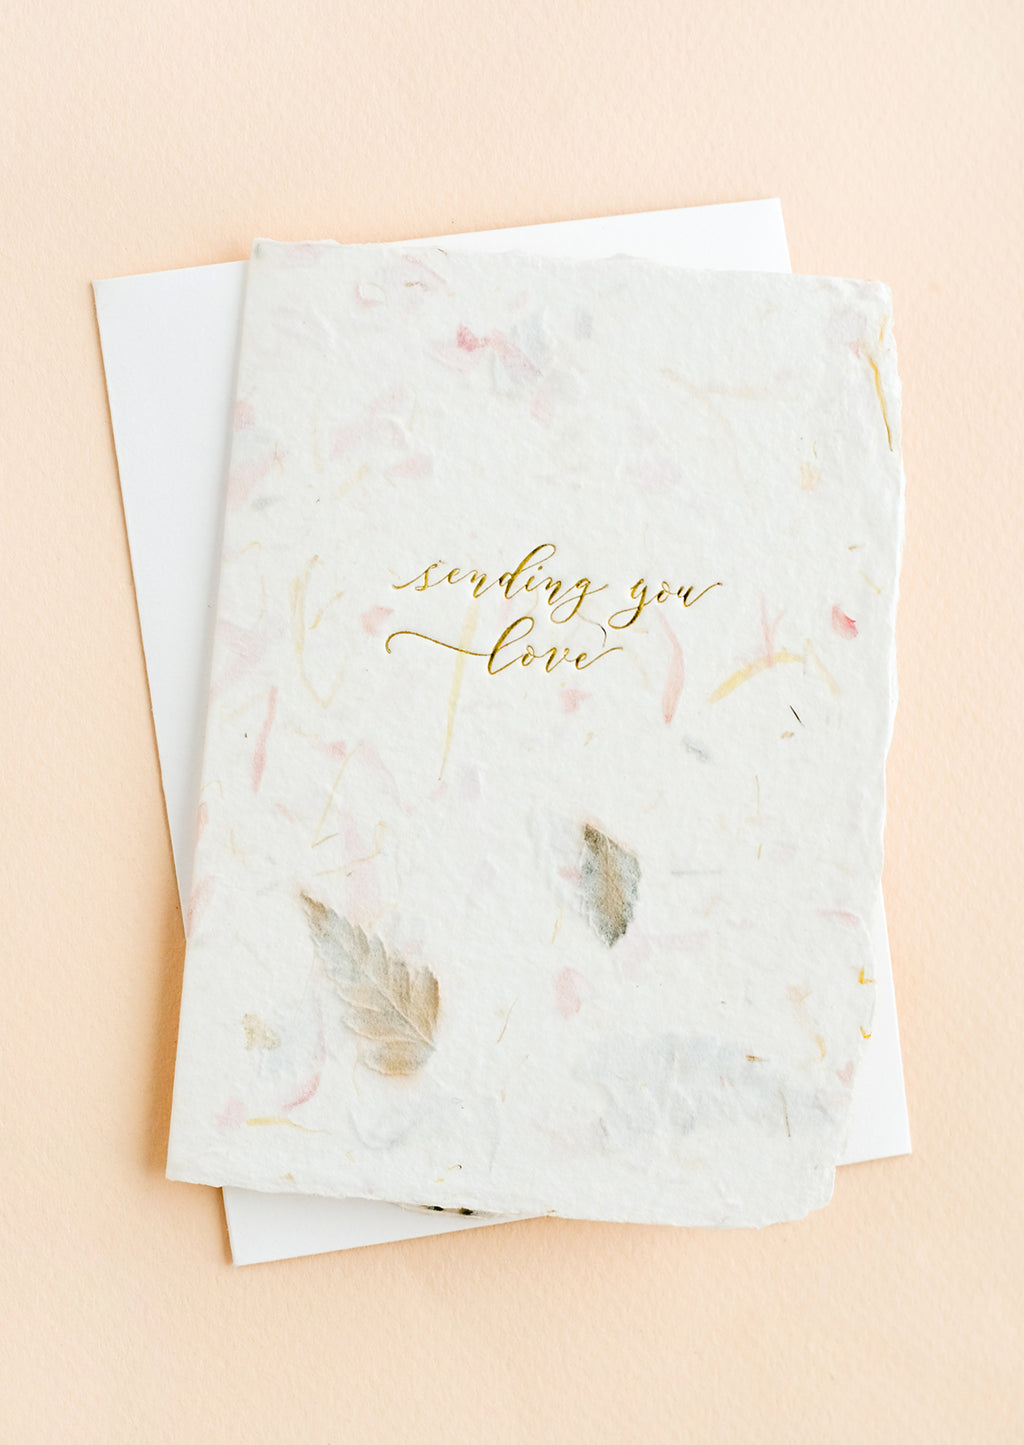 3: A greeting card made from handmade flower paper with gold script on front that reads "Sending You Love".